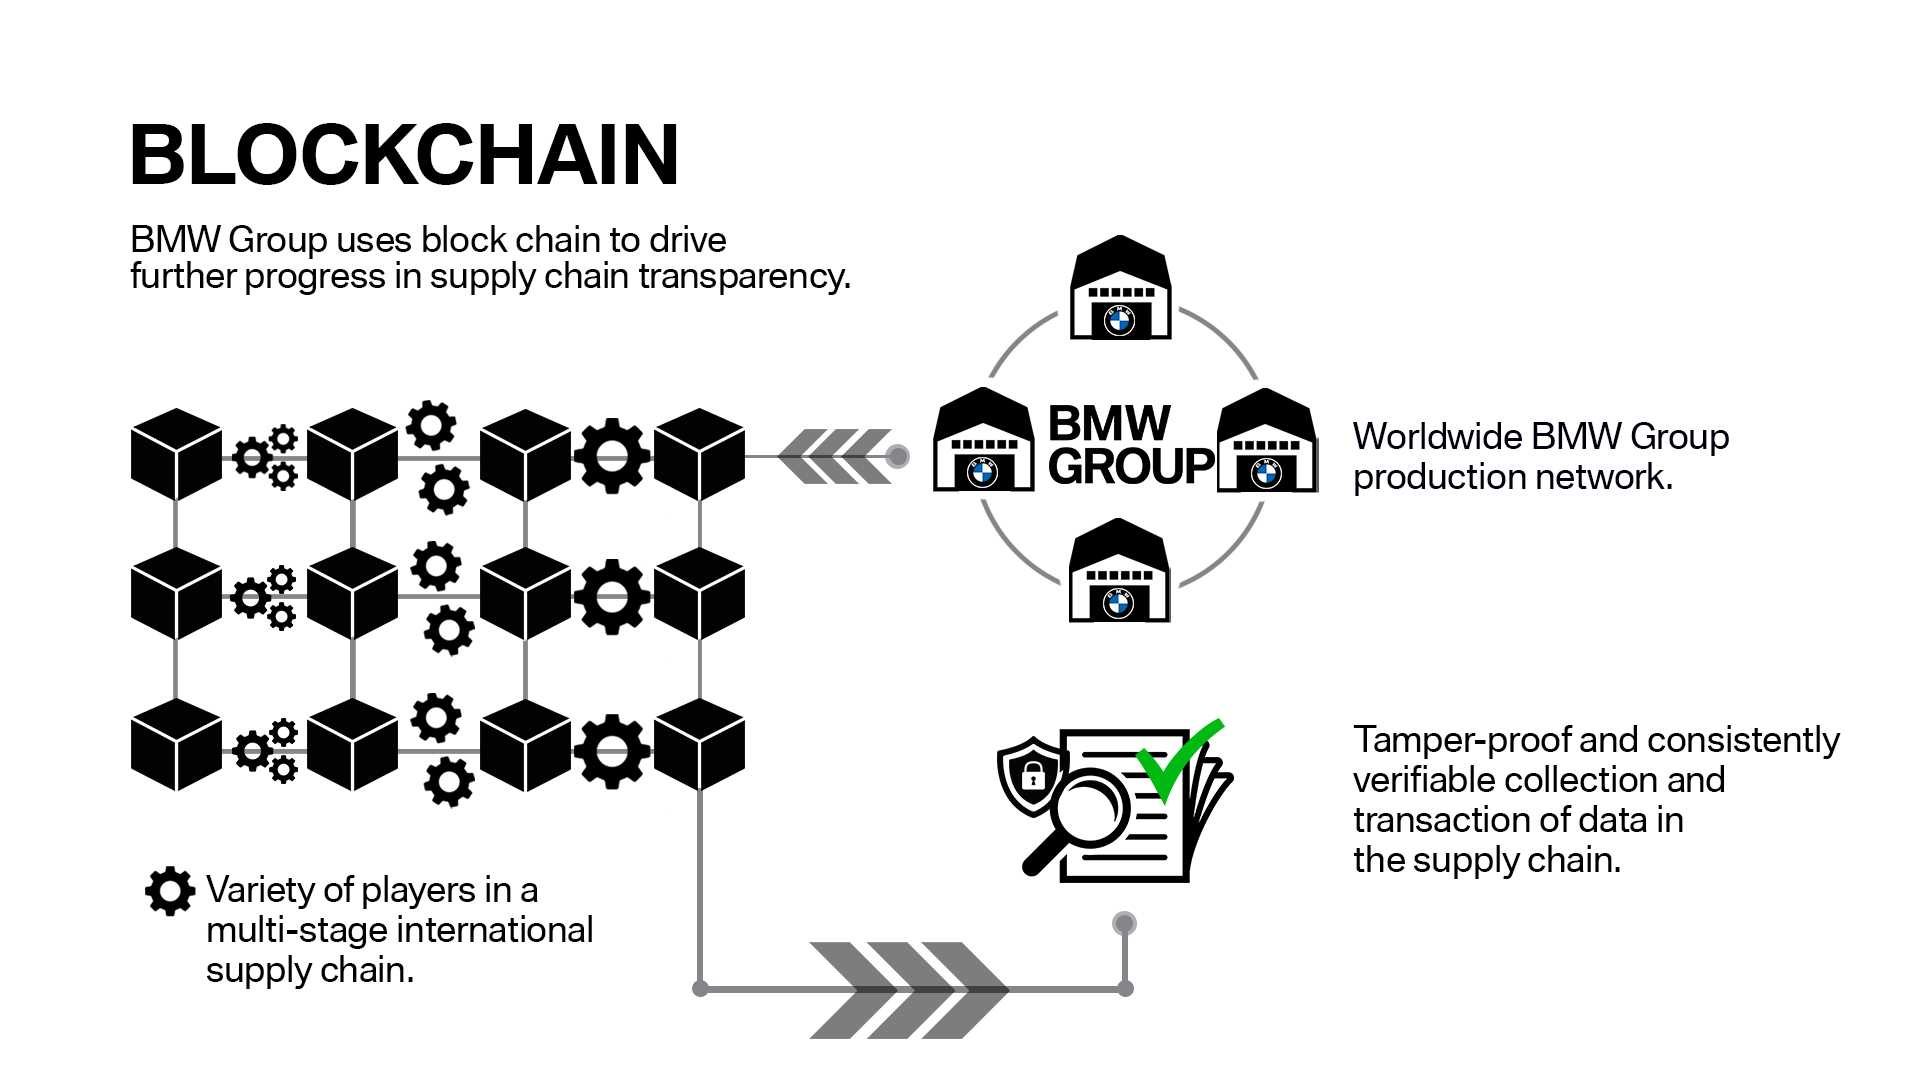 VeChain and BMW are developing a car security platform